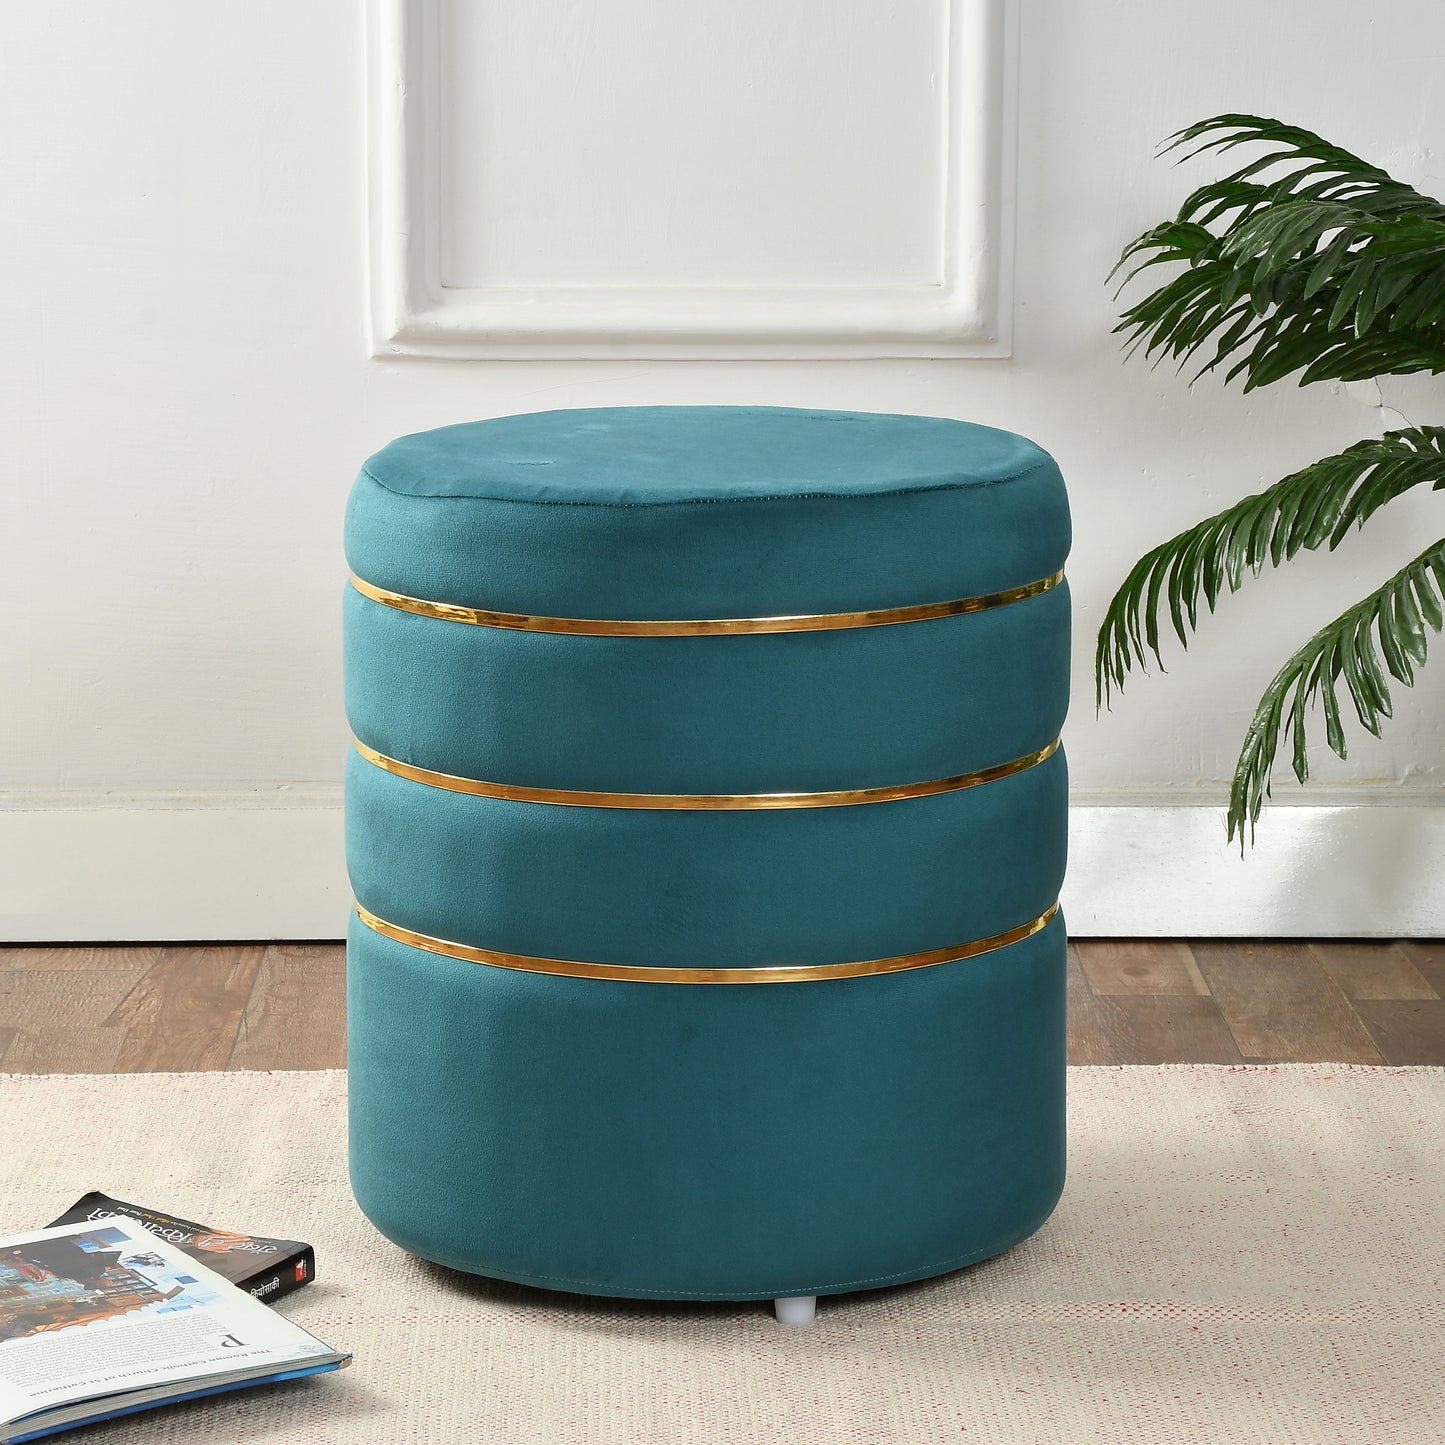 Homeaccex Ottoman Pouffe Puffy Stool Footstool, 18inch Height